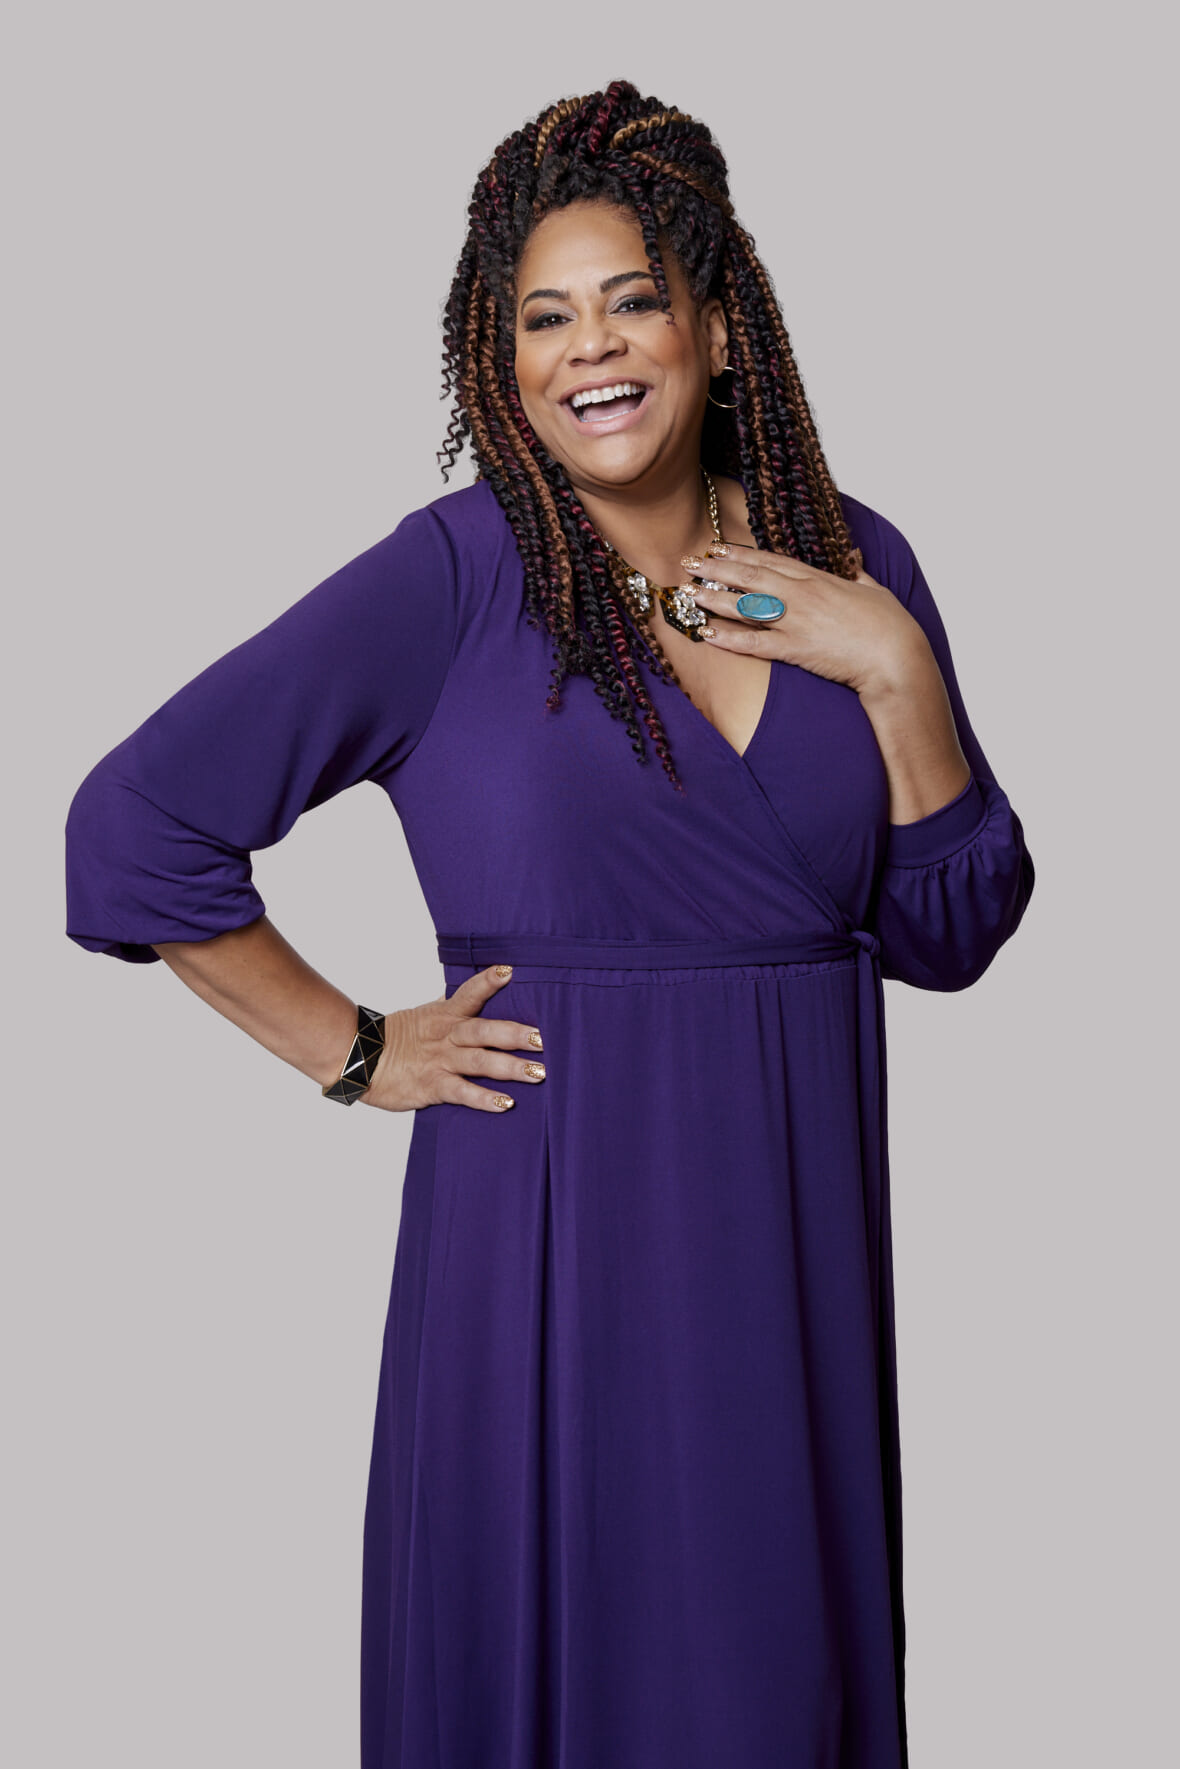 Kim Coles on 'The Surreal Life,' diving into the reality TV experiment and  how some of her roommates became 'family' - TheGrio